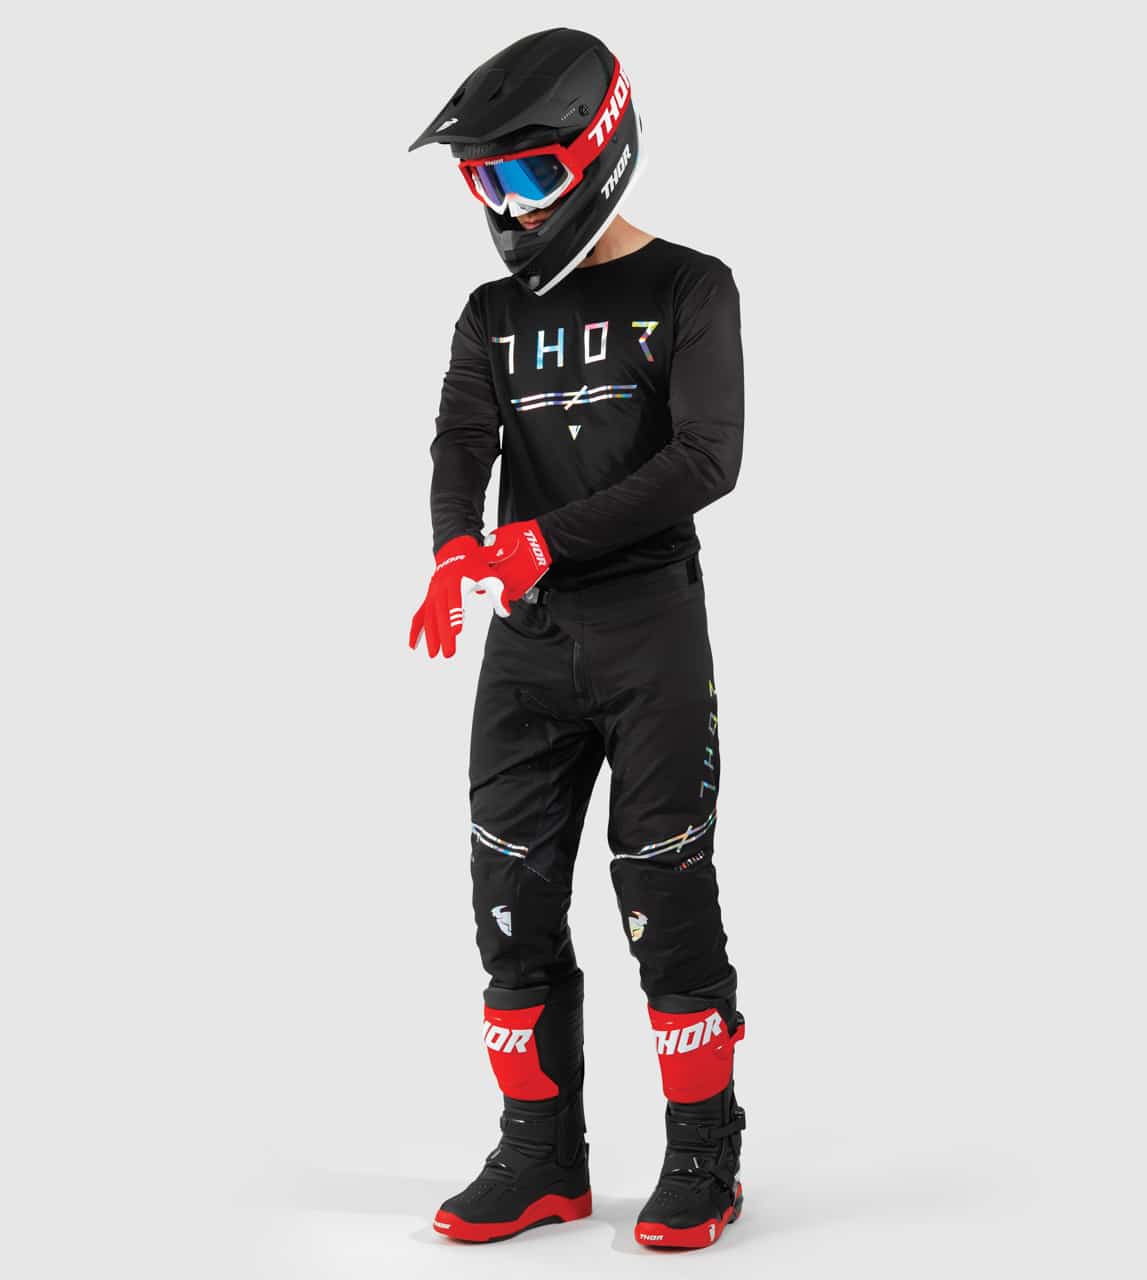 Thor Mx Adult Motocross Jersey and Pant SECTOR VAPOR 2021 Adults Race Suit Quad Bike Trial ATV BMX Off Road Enduro Shirt and Trouser Set Mint/Charcoal